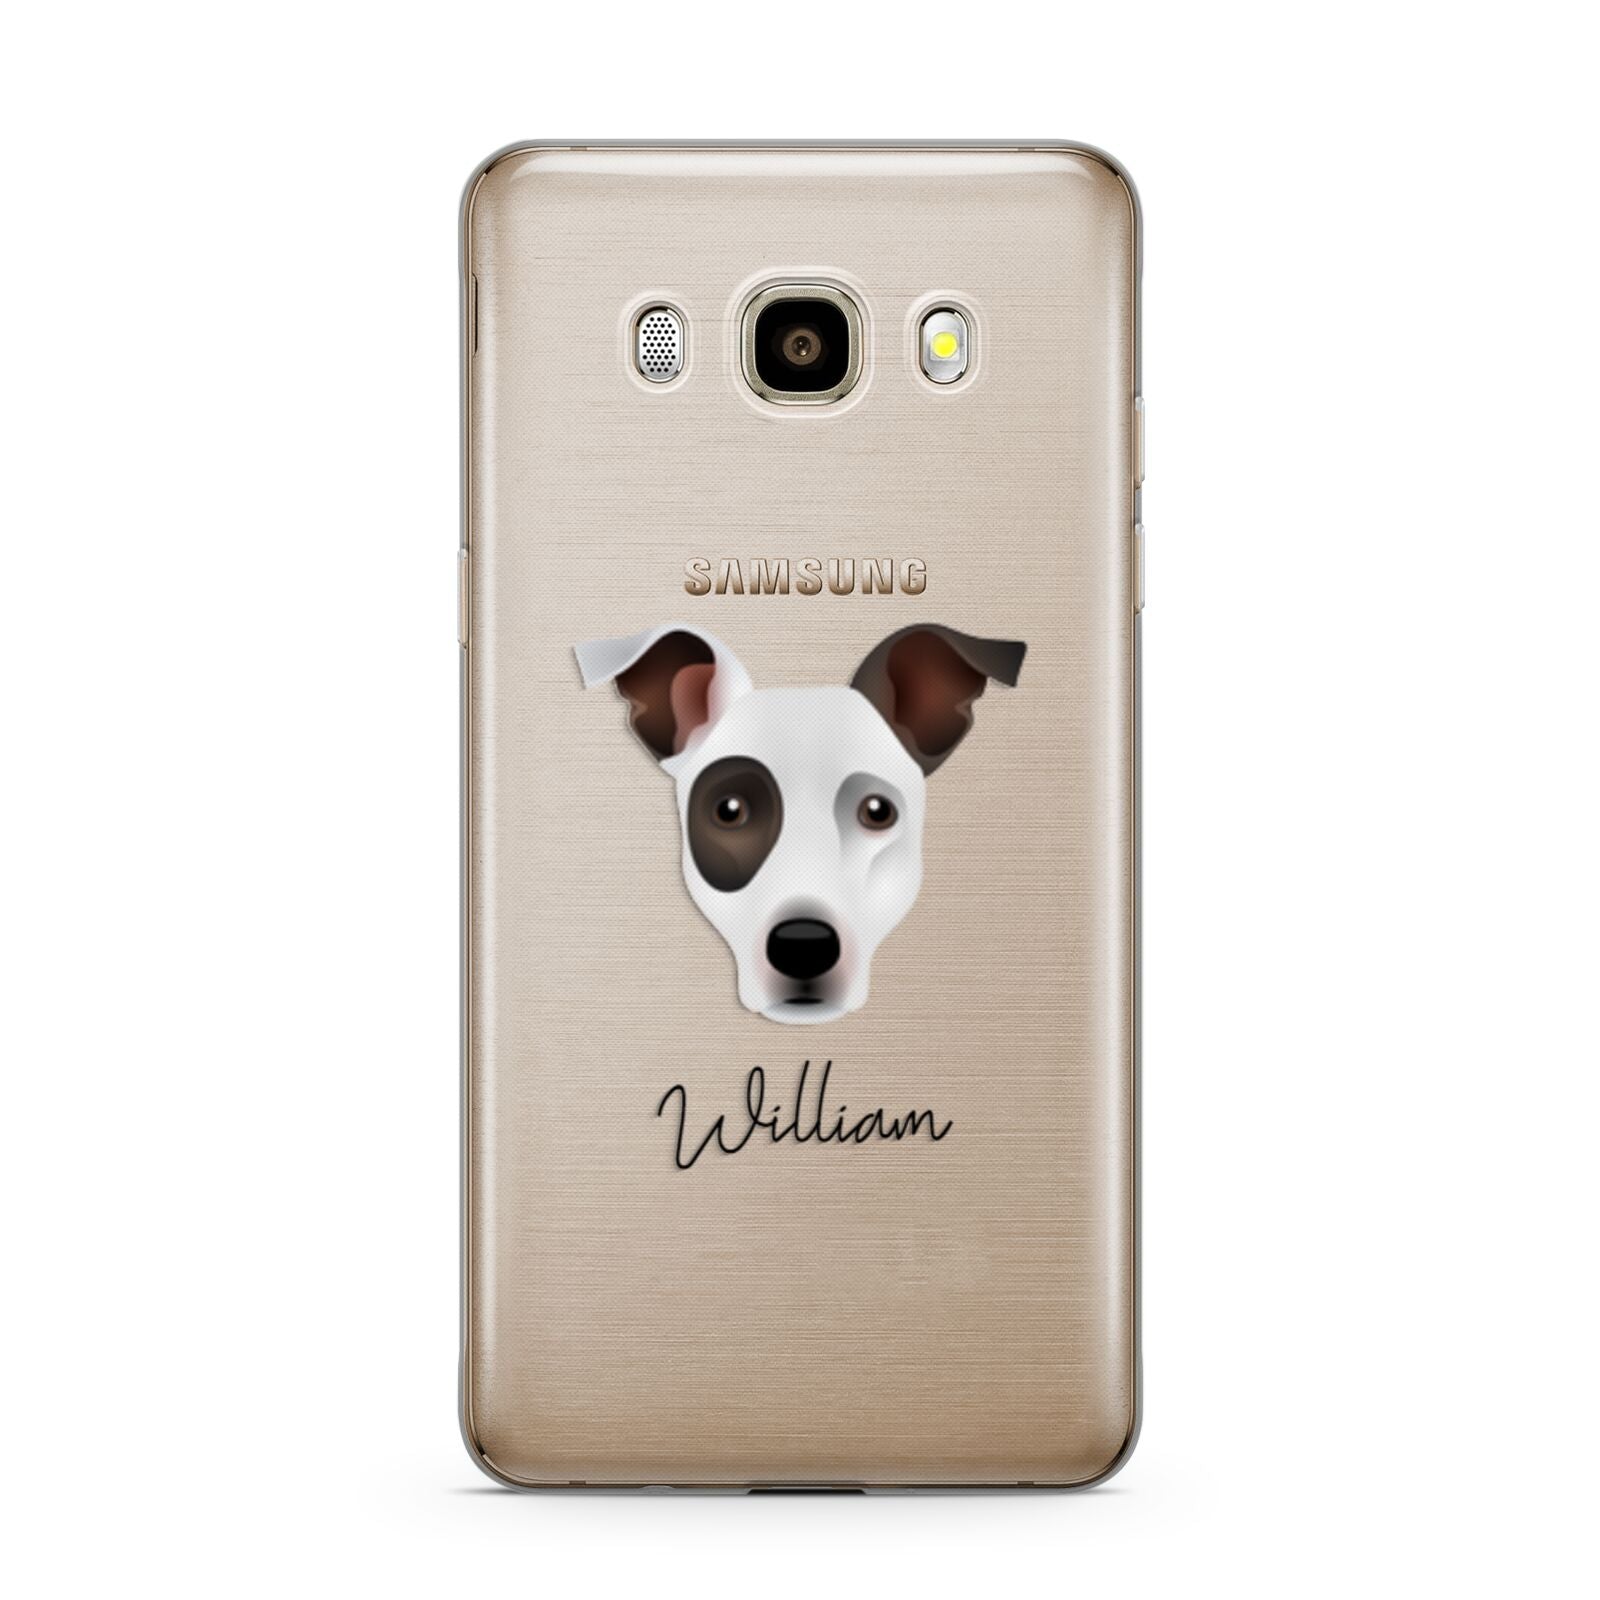 Staffy Jack Personalised Samsung Galaxy J7 2016 Case on gold phone